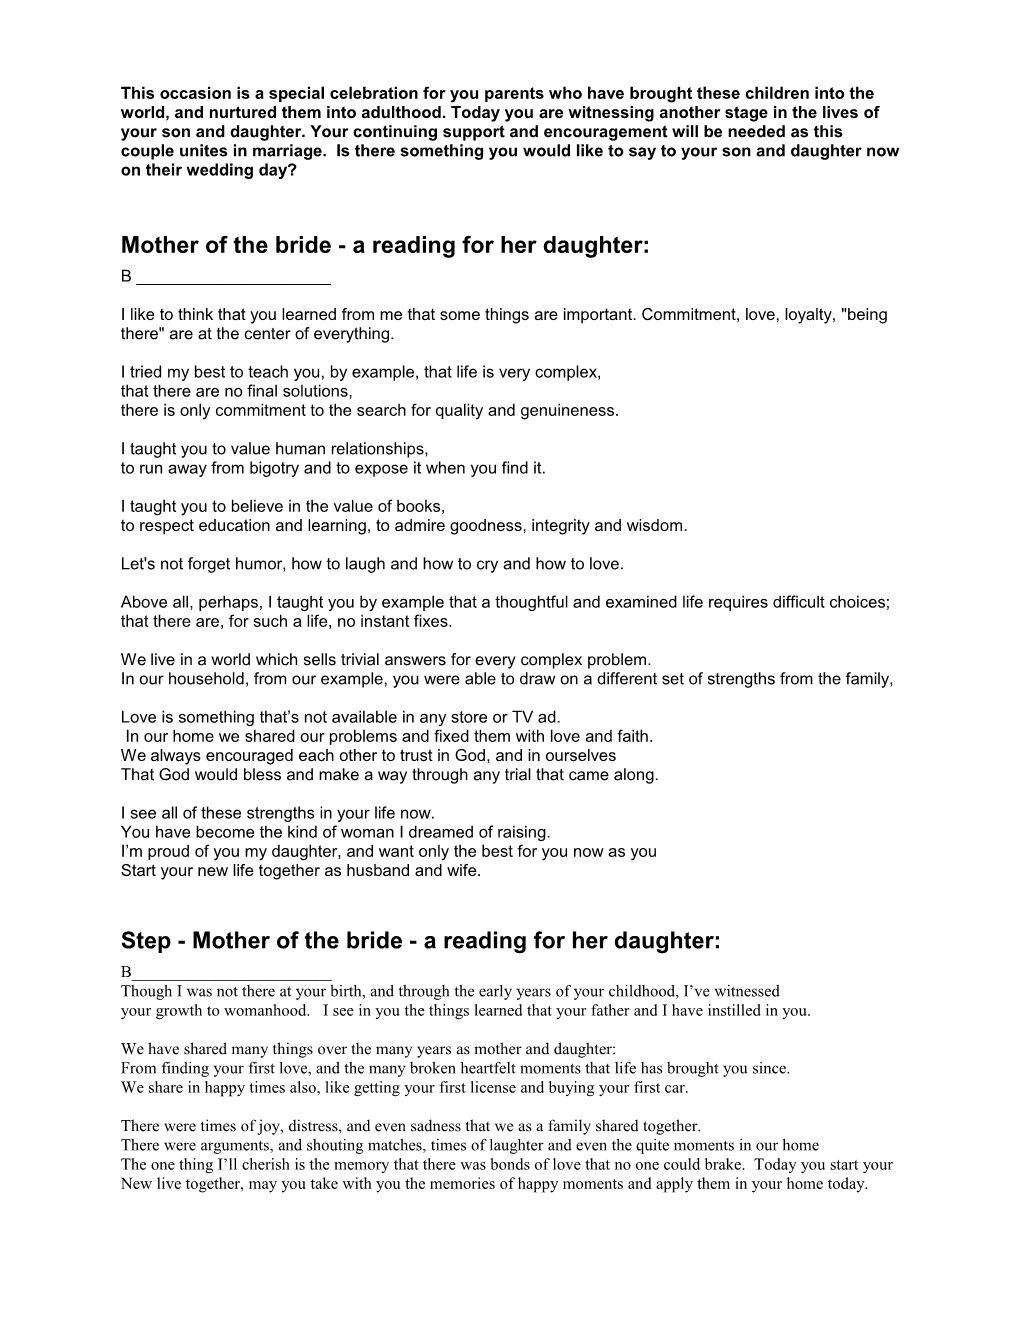 Mother of the Bride - a Reading for Her Daughter